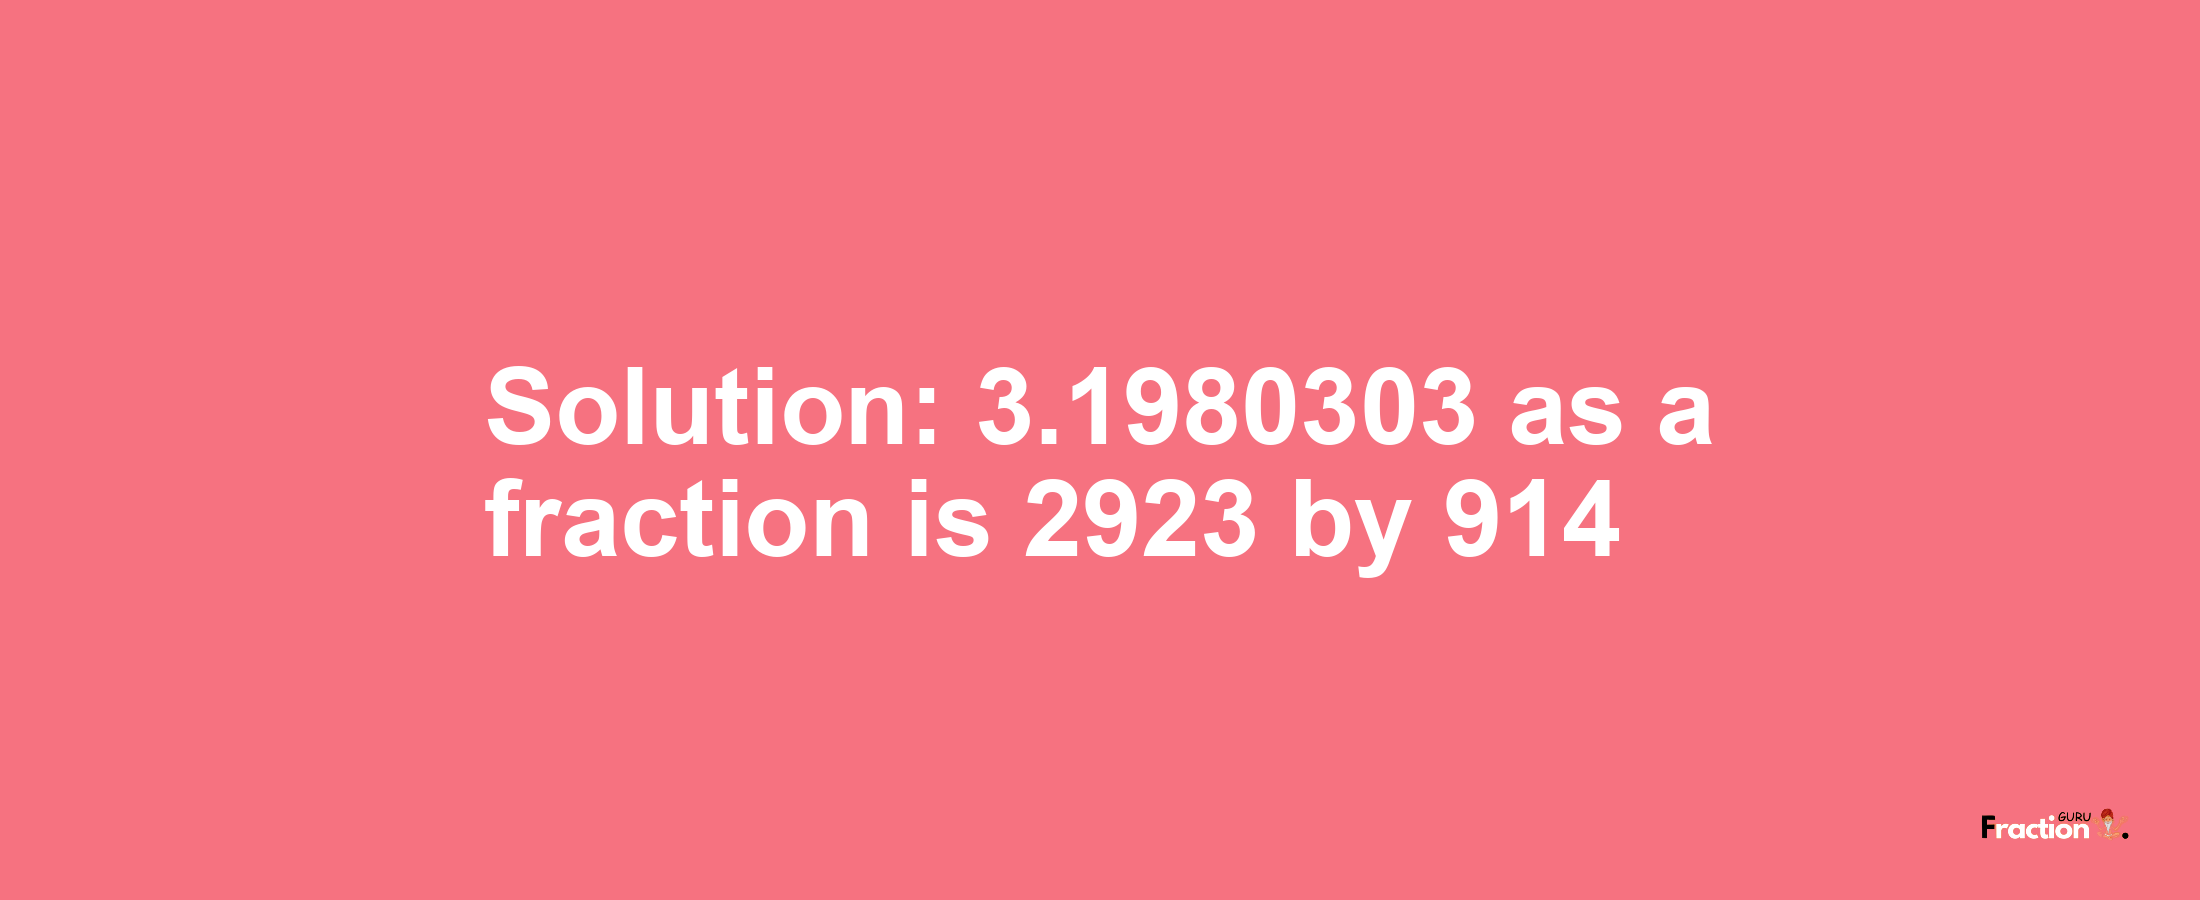 Solution:3.1980303 as a fraction is 2923/914